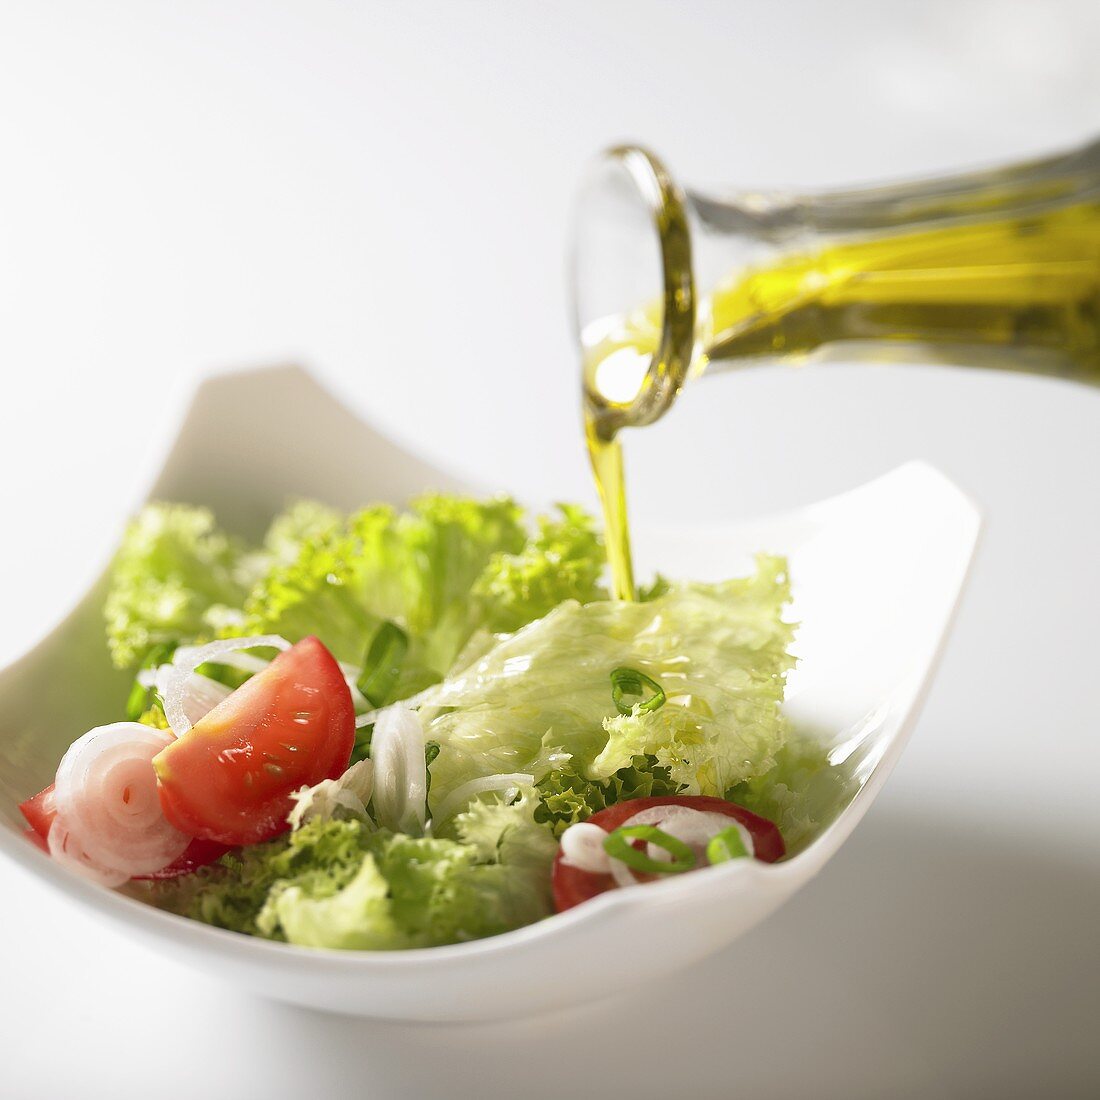 Pouring olive oil over salad leaves with tomatoes